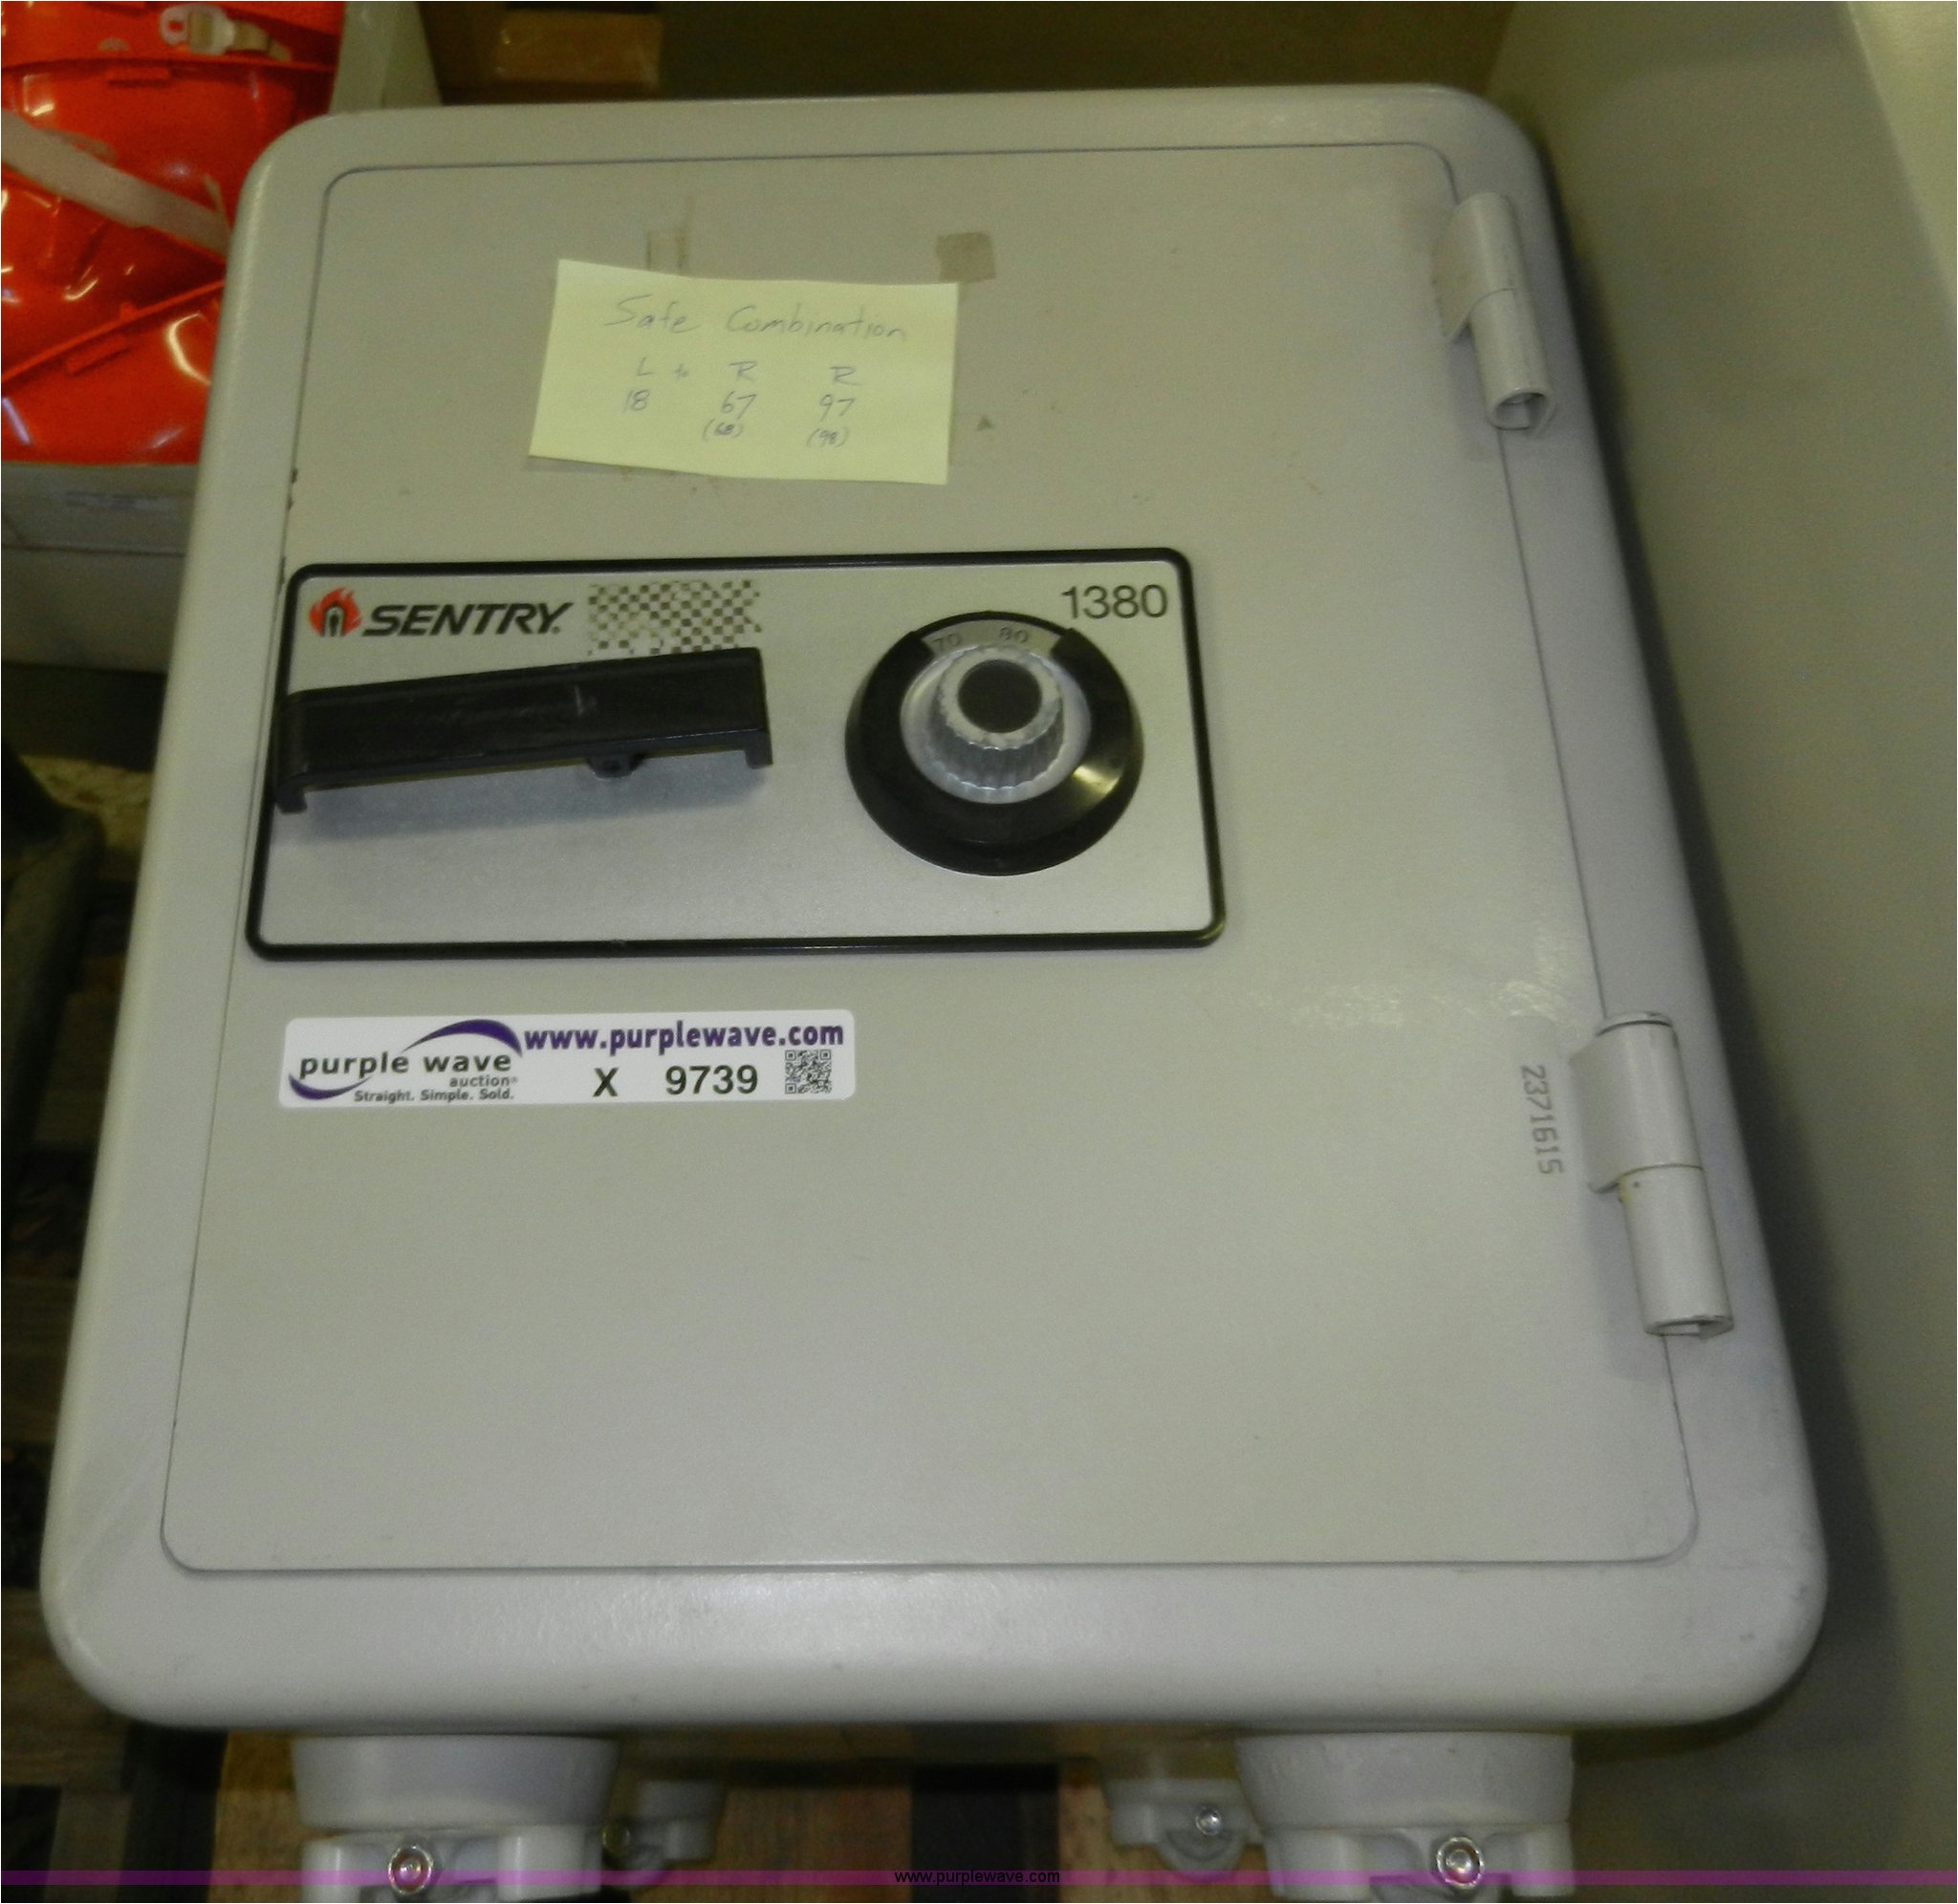 x9739 image for item x9739 sentry 1380 combination safe